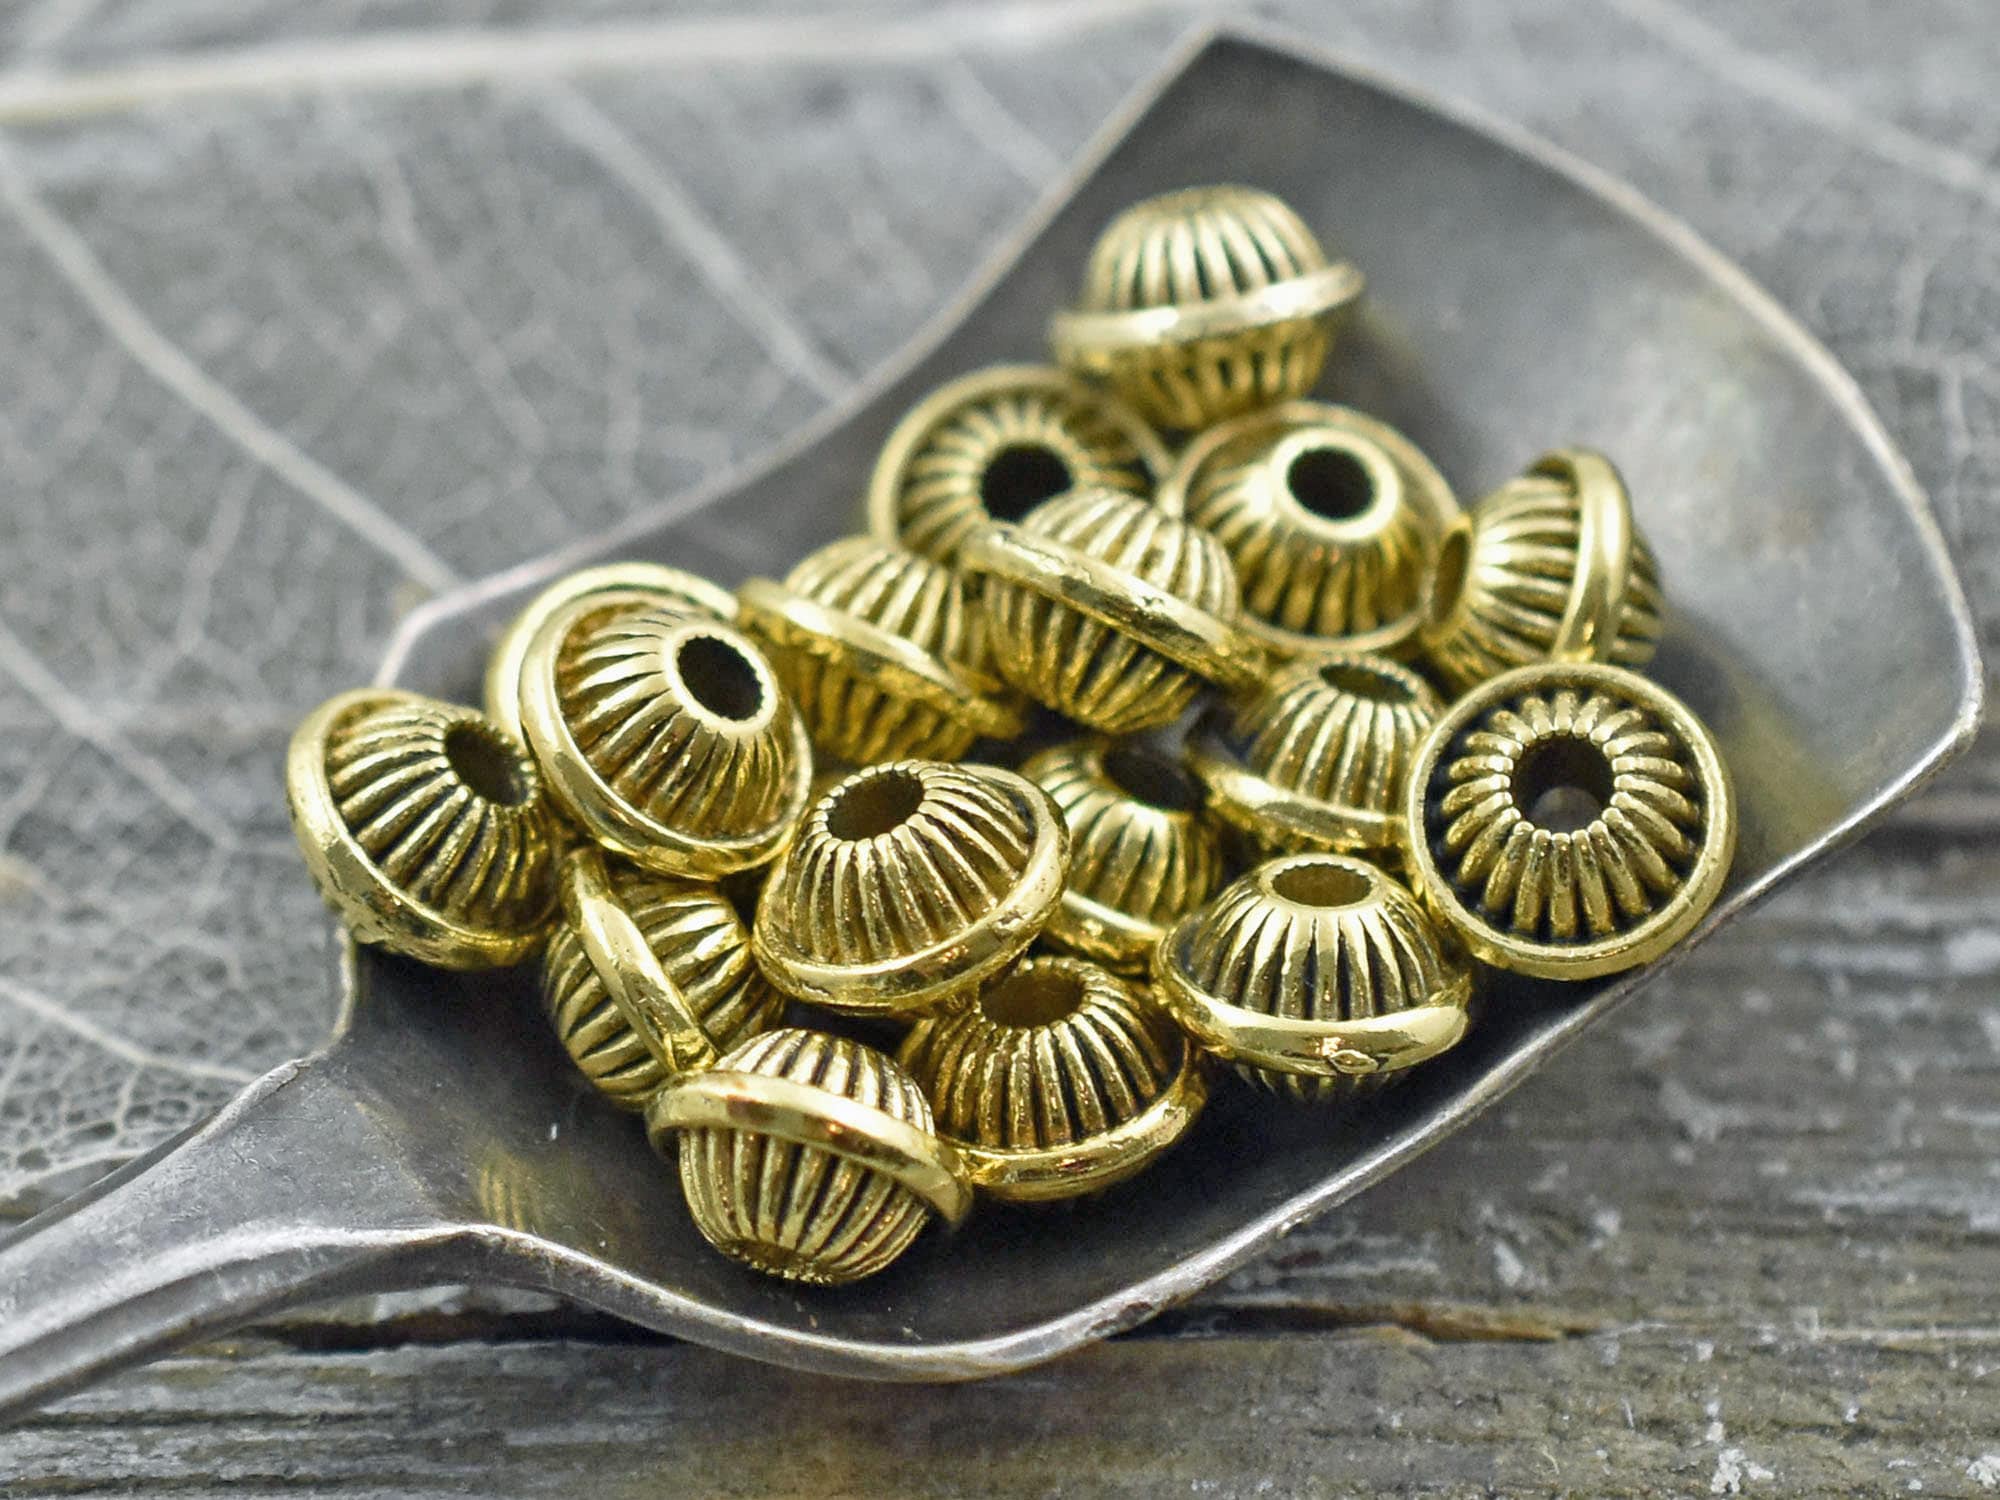 Metal Spacers - Gold Spacer Beads - Gold Spacers - Metal Beads